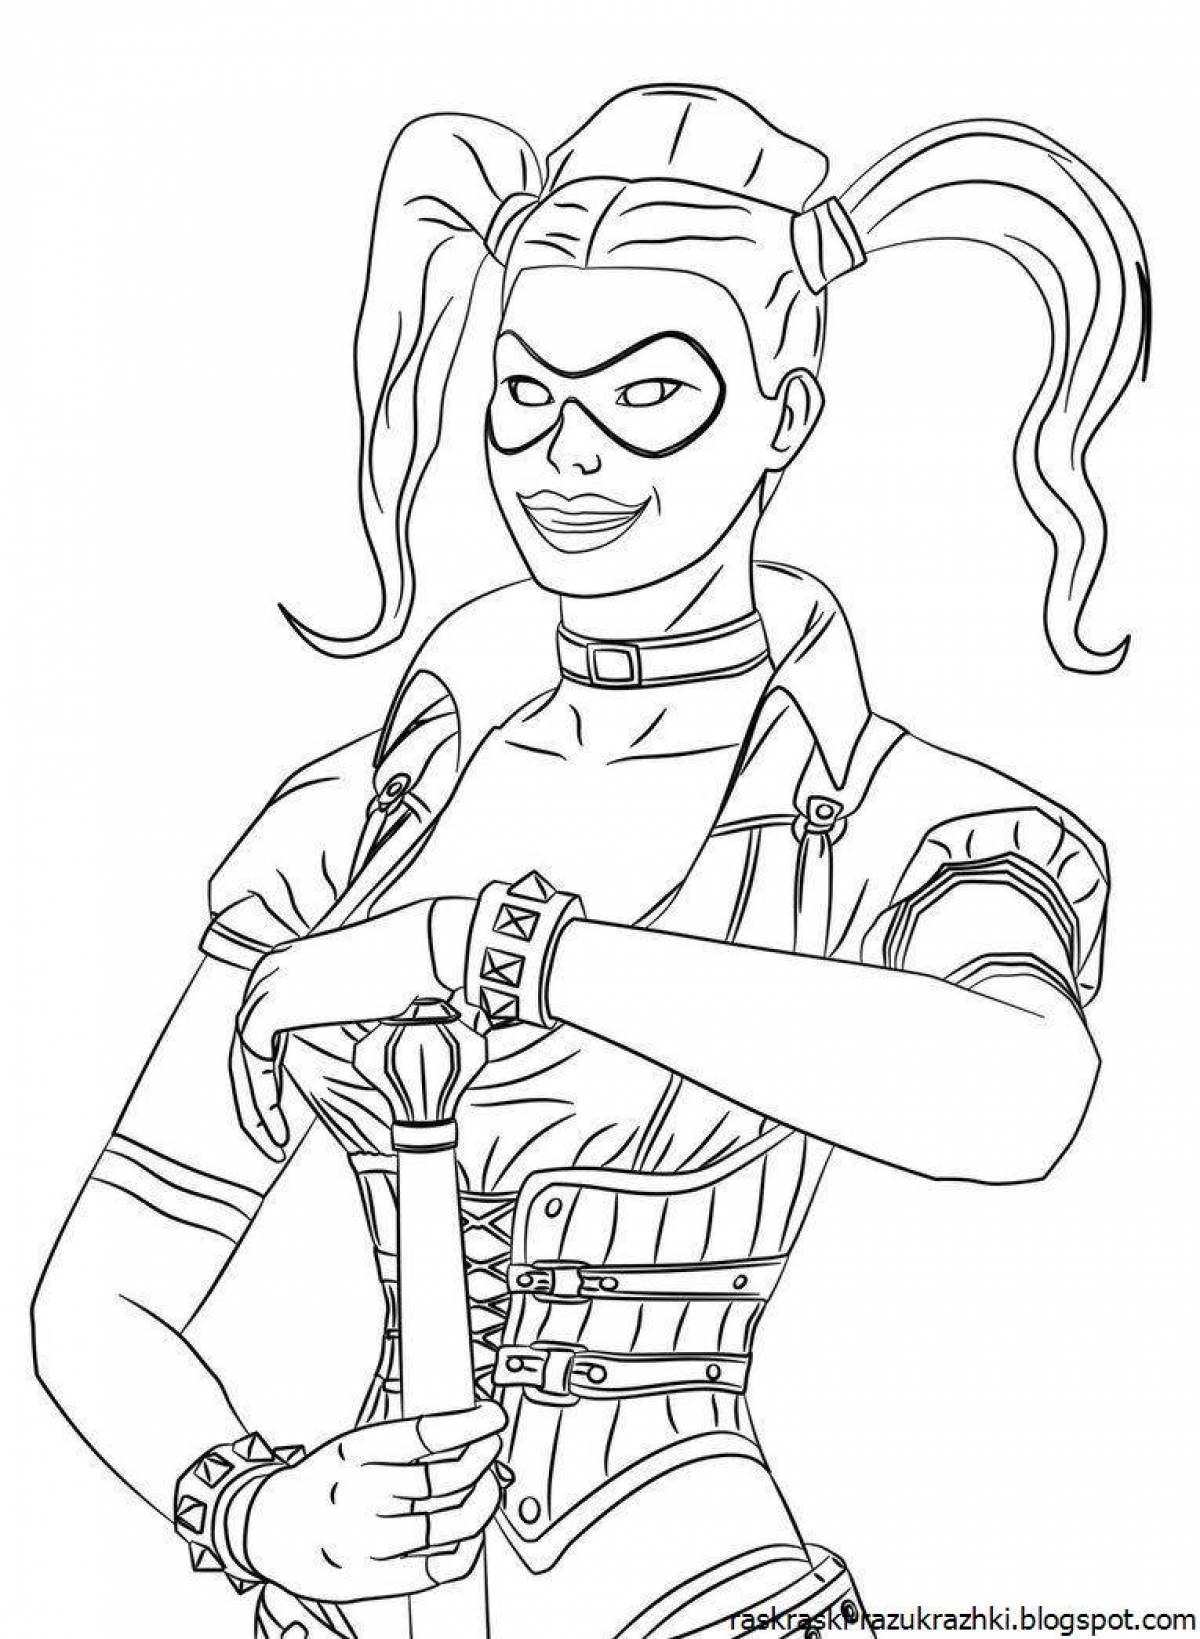 Amazing harley quinn coloring page